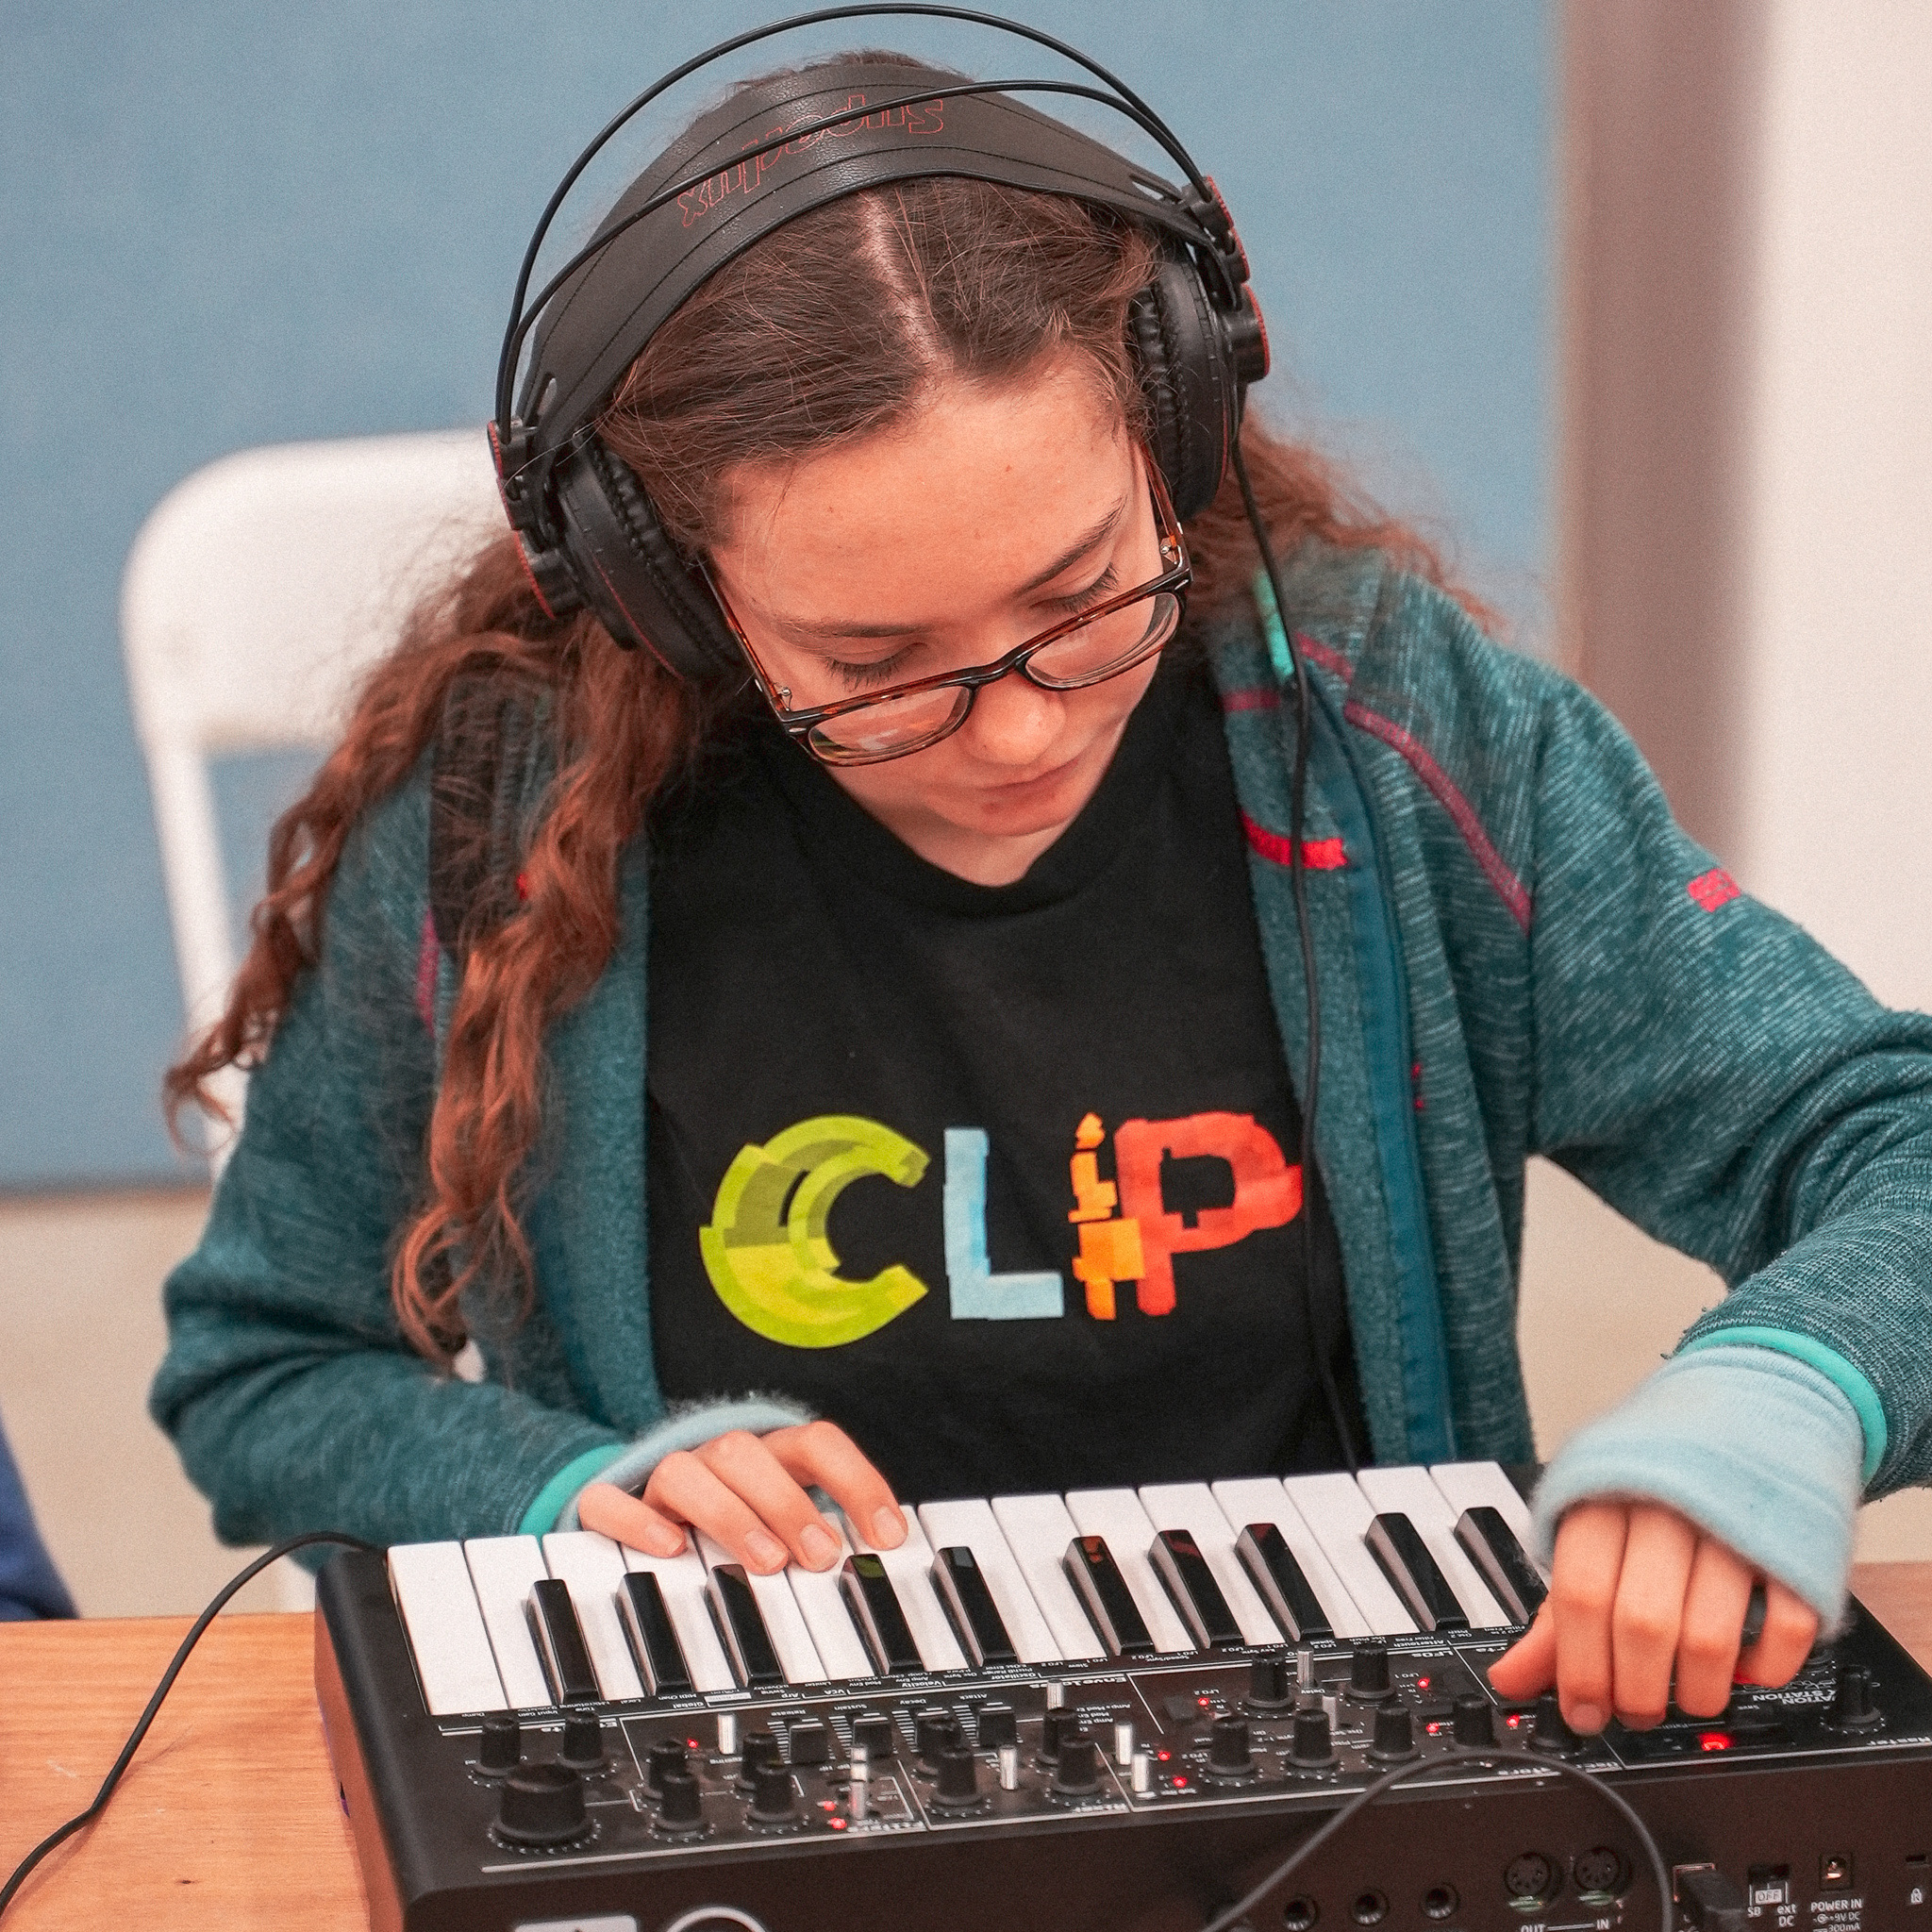 An image of a young person playing with a keyboard. They have headphones on and a t-shirt on with the CLIP logo on it.